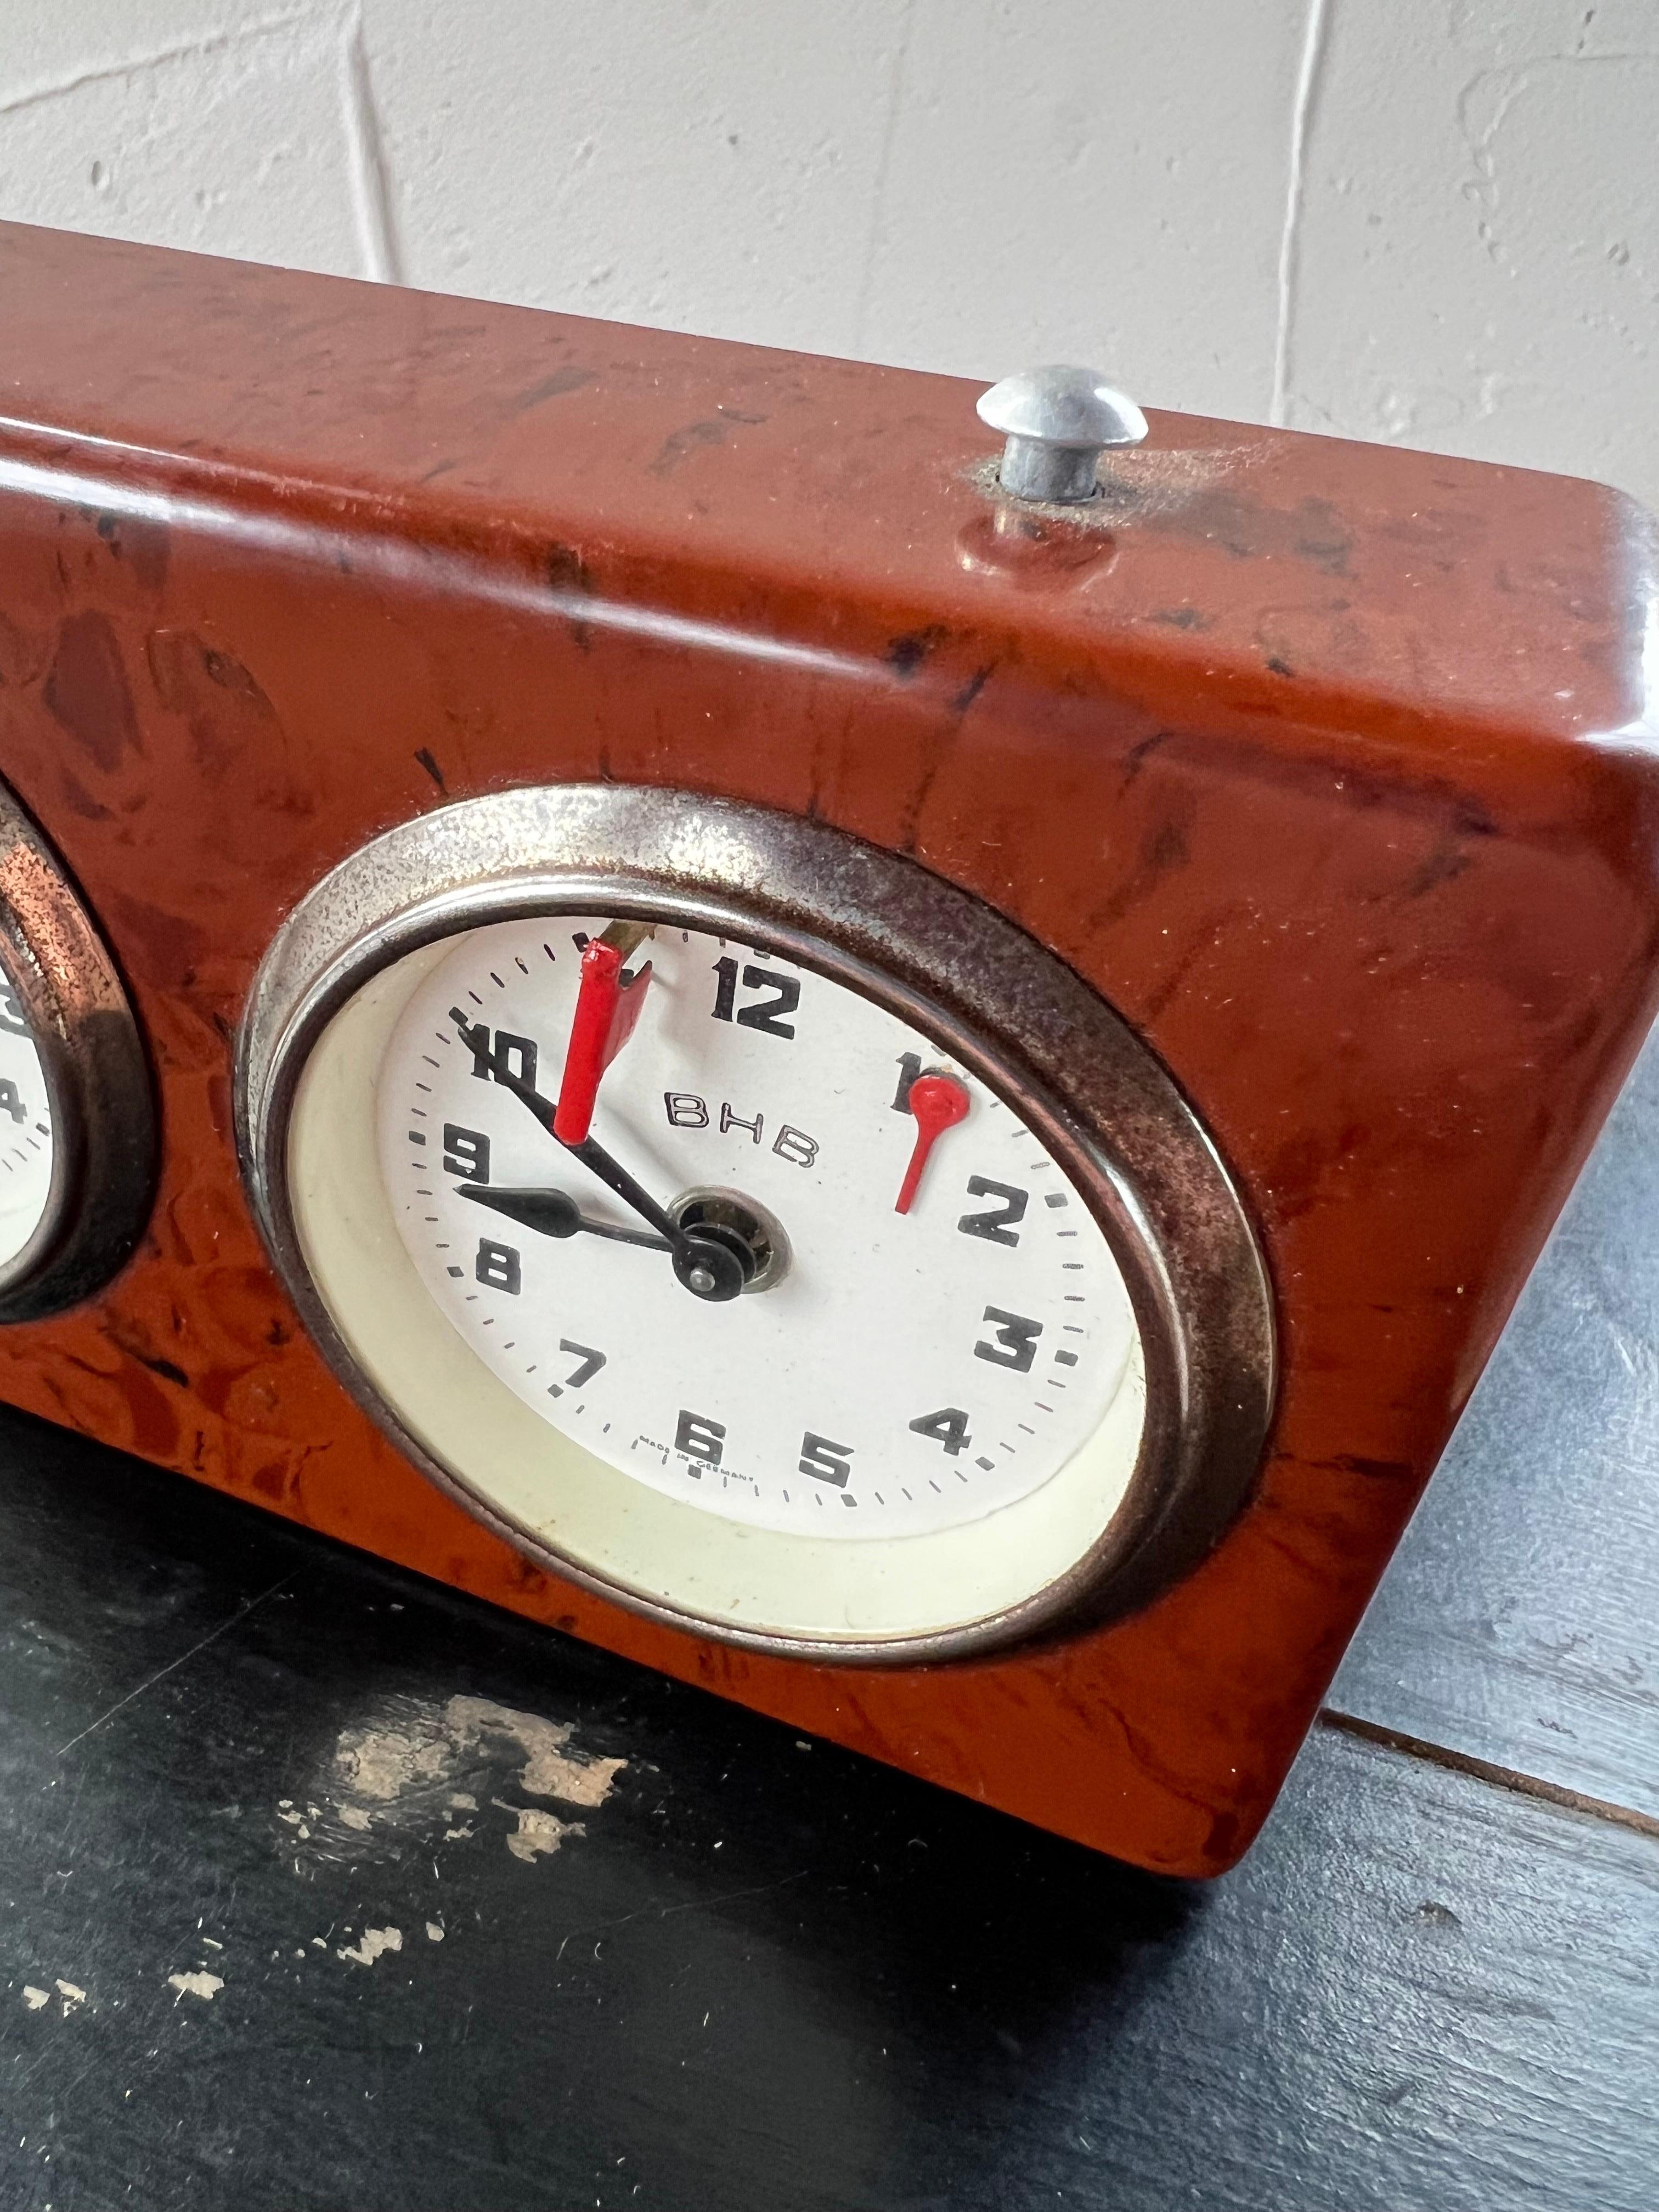 Beautiful old working BHB tournament chess clock from the 1950s, brown flamed Bakelite. Small in size.

Small in size and not often found in this color scheme with this bakelite. Works fine! See images for overall condition. Has some tarnisch on the